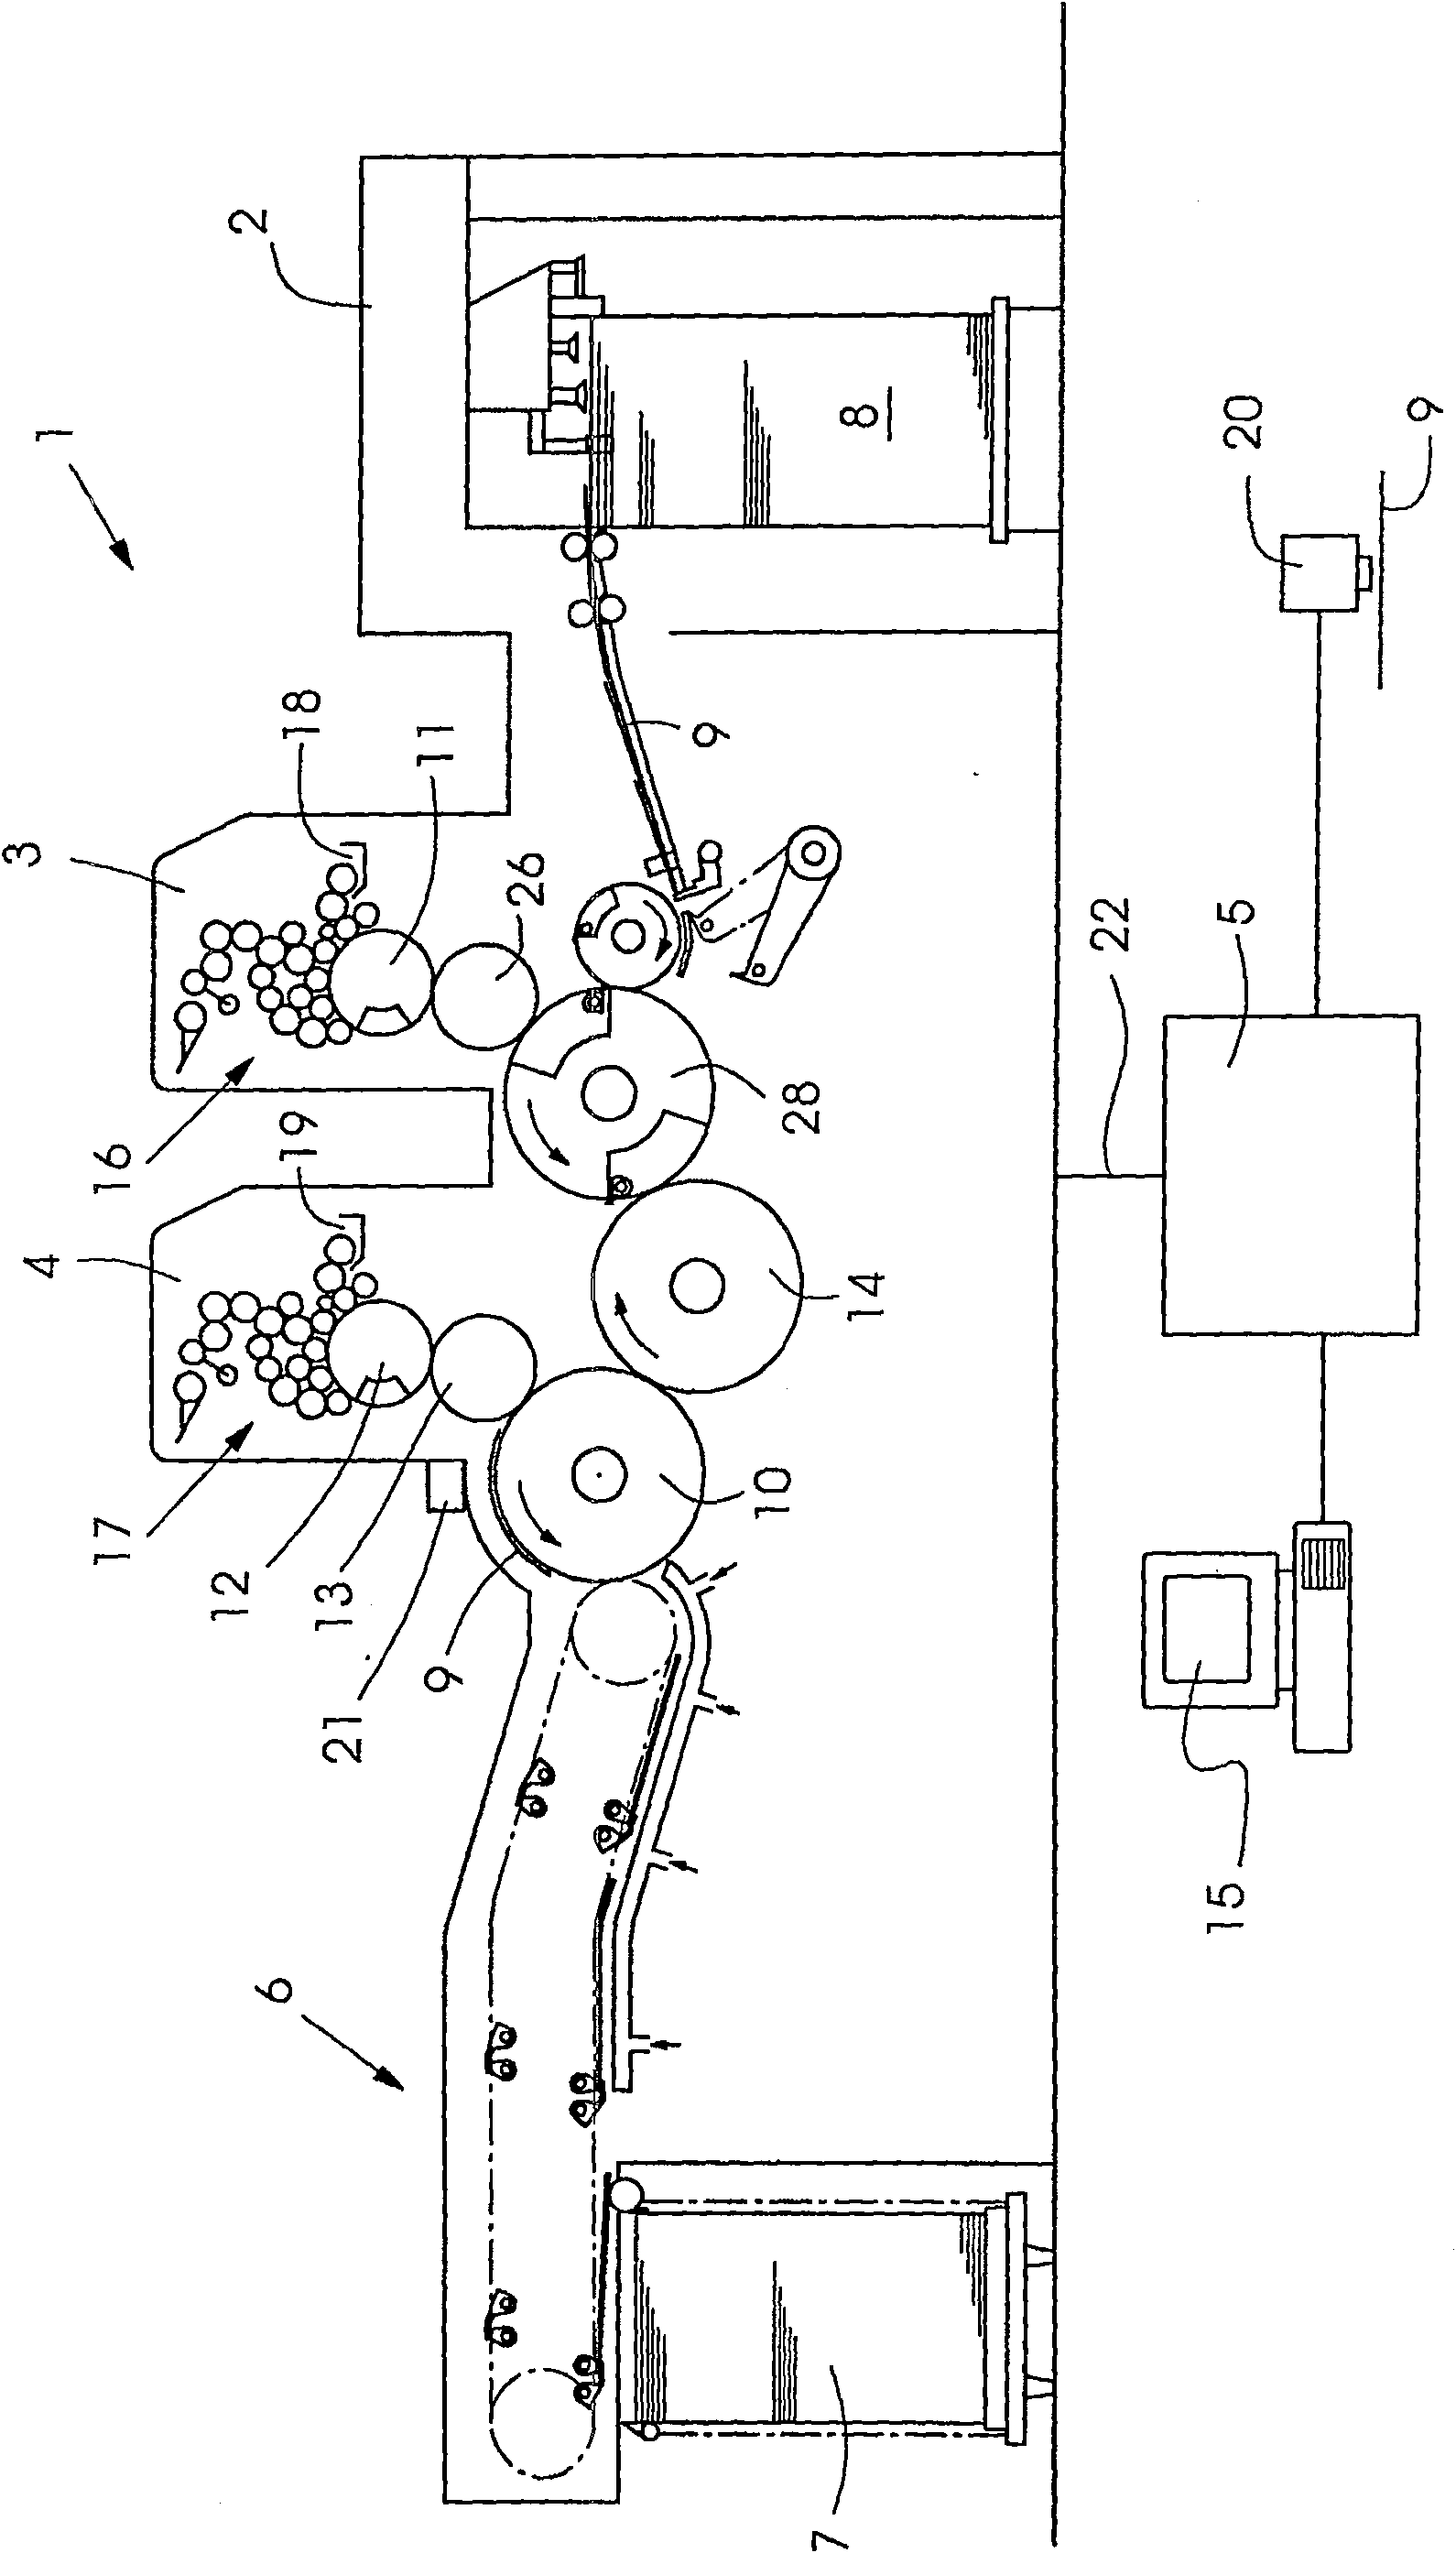 Method for processing color measurement in printing machine